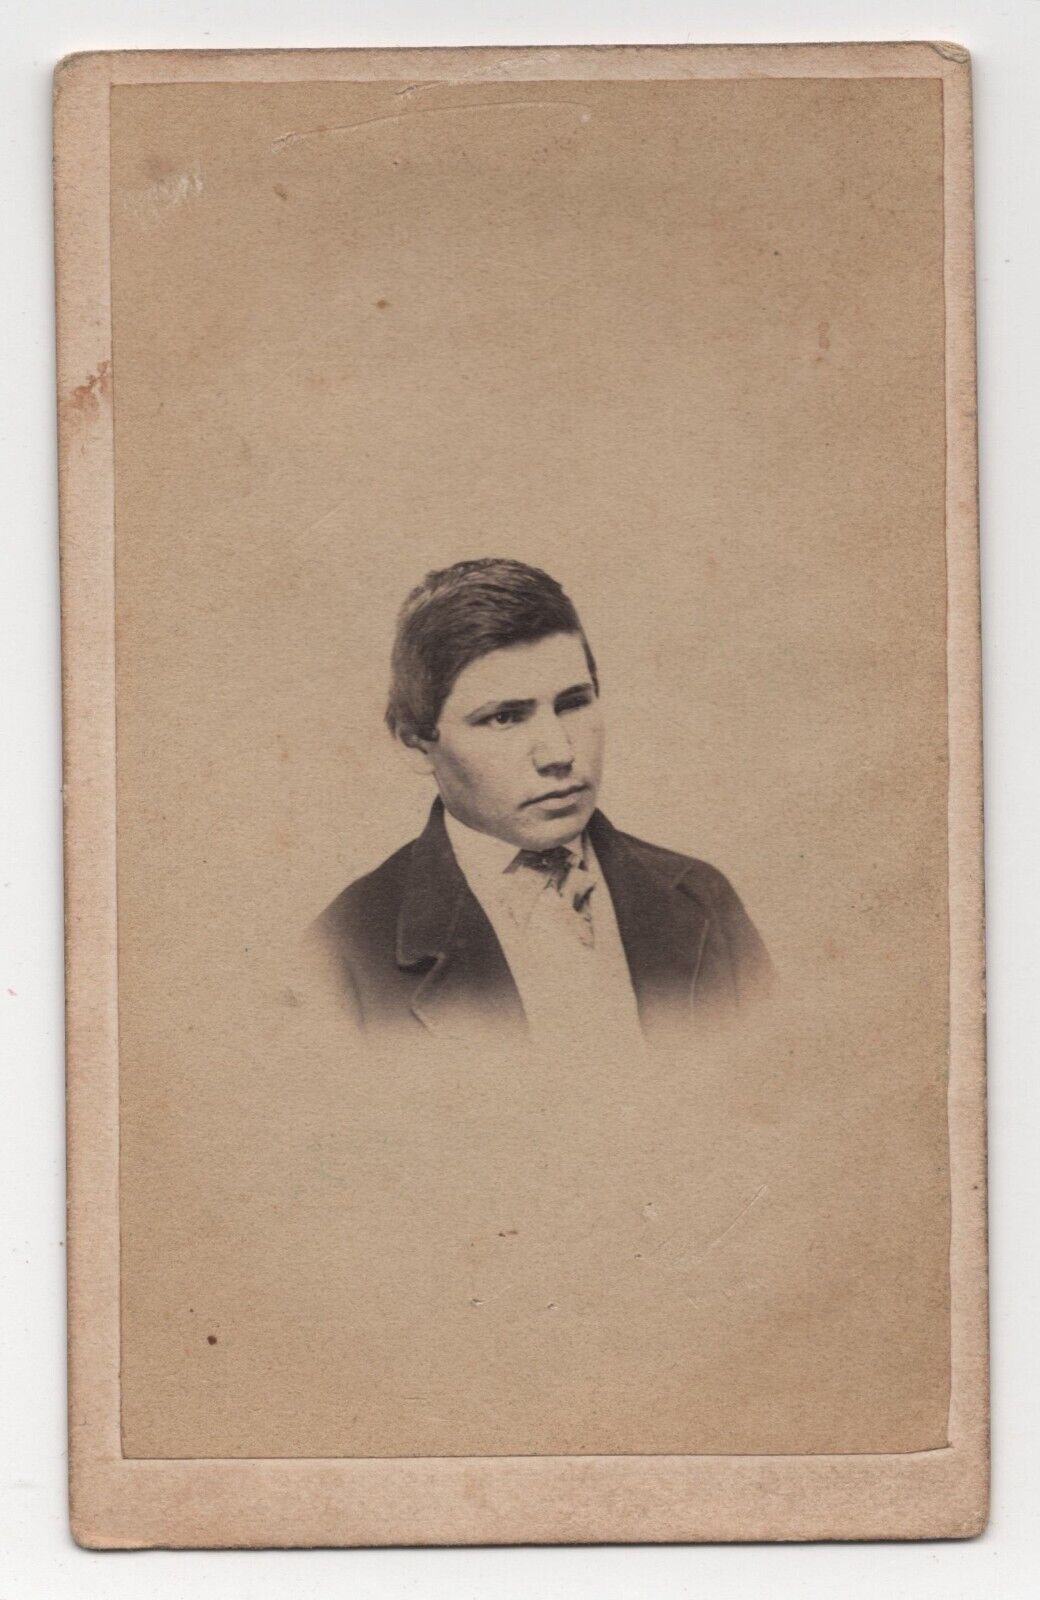 ANTIQUE CDV CIRCA 1860s F.M. YEAGER HANDSOME YOUNG MAN IN SUIT READING PA.